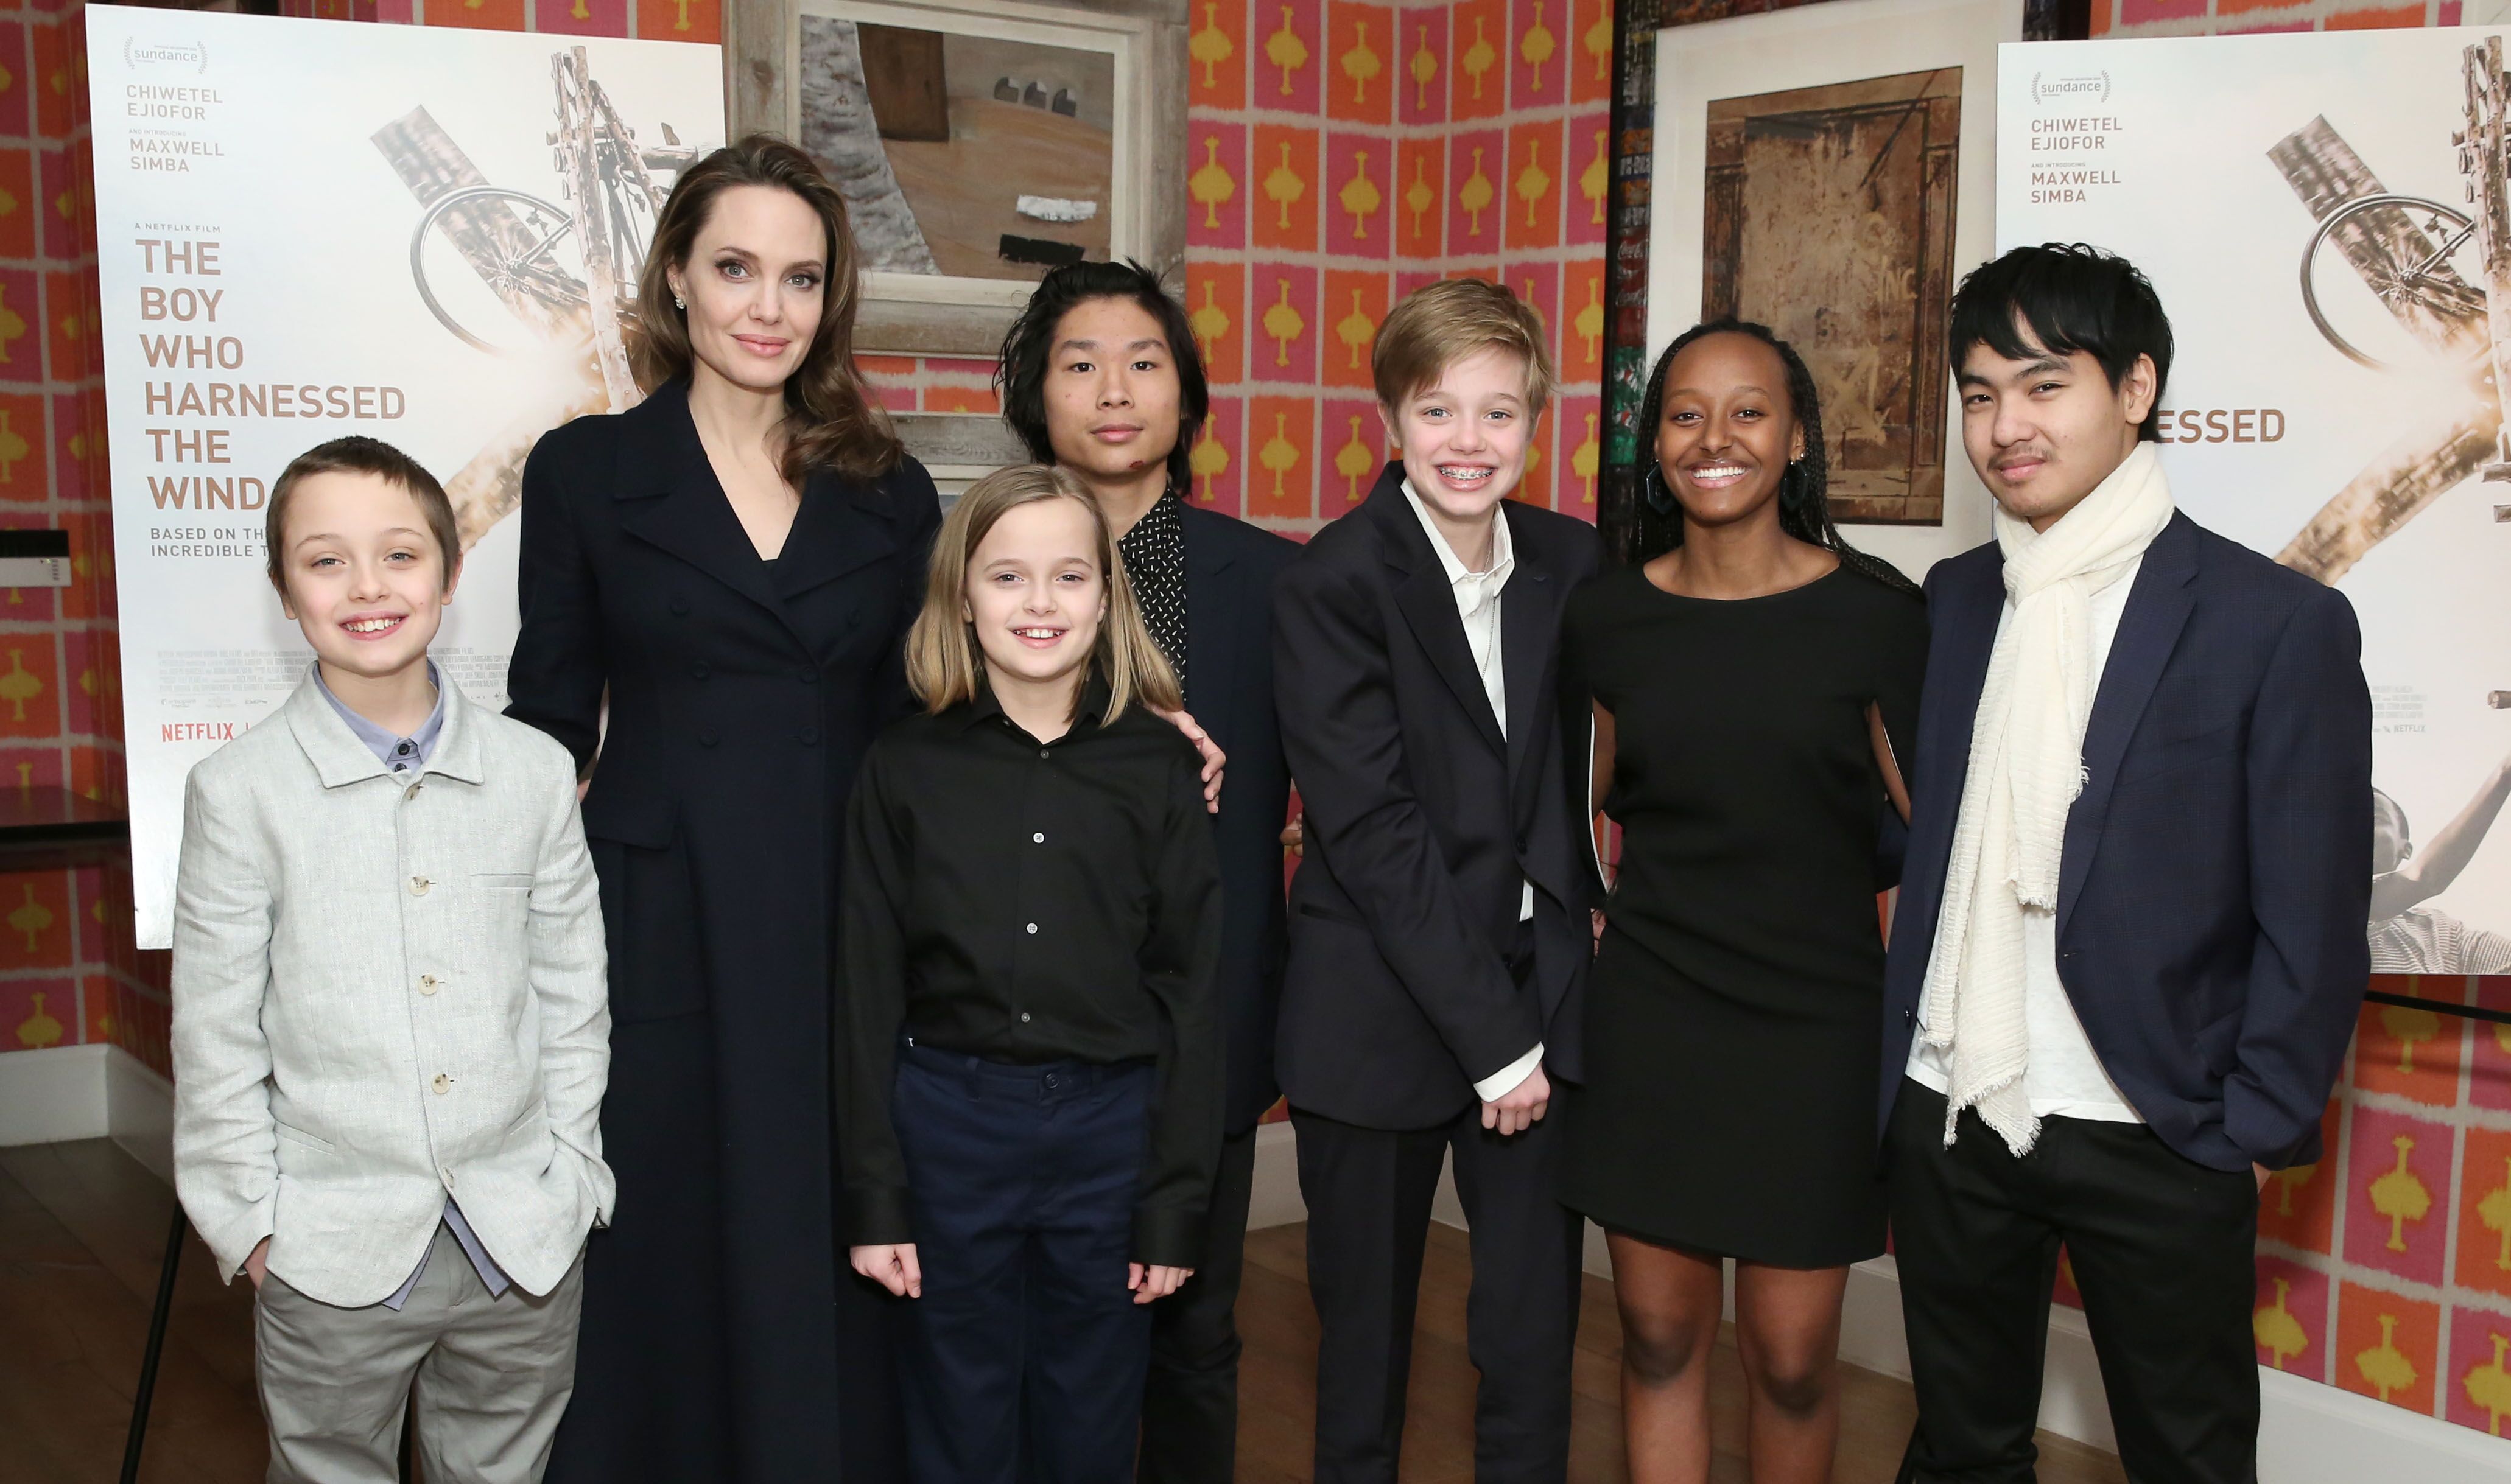 Angelina Jolie with children Knox Leon Jolie-Pitt, Vivienne Marcheline Jolie-Pitt, Pax Thien Jolie-Pitt, Shiloh Nouvel Jolie-Pitt, Zahara Marley Jolie-Pitt and Maddox Chivan Jolie-Pitt attend "The Boy Who Harnessed The Wind" Special Screening at Crosby Street Hotel on February 25, 2019 in New York City. | Source: Getty Images